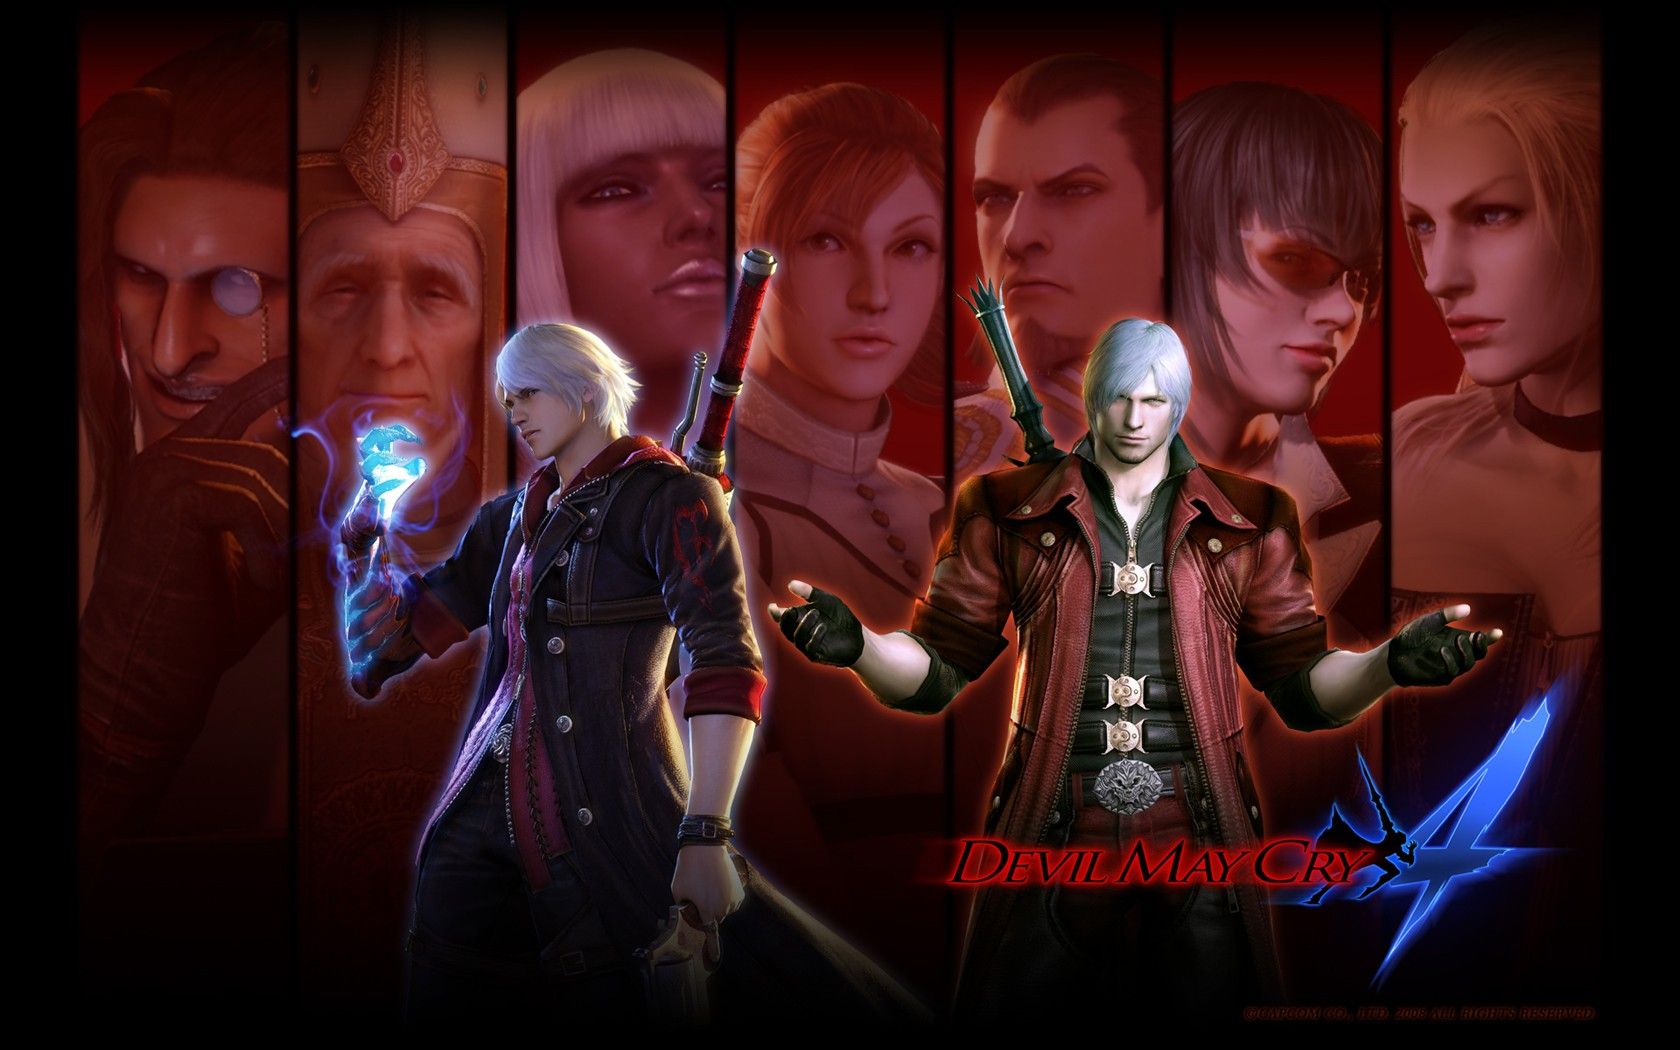 xbox360 game - Devil may cry 4 HQ wallpapers 1680x1050 NO.10 ...